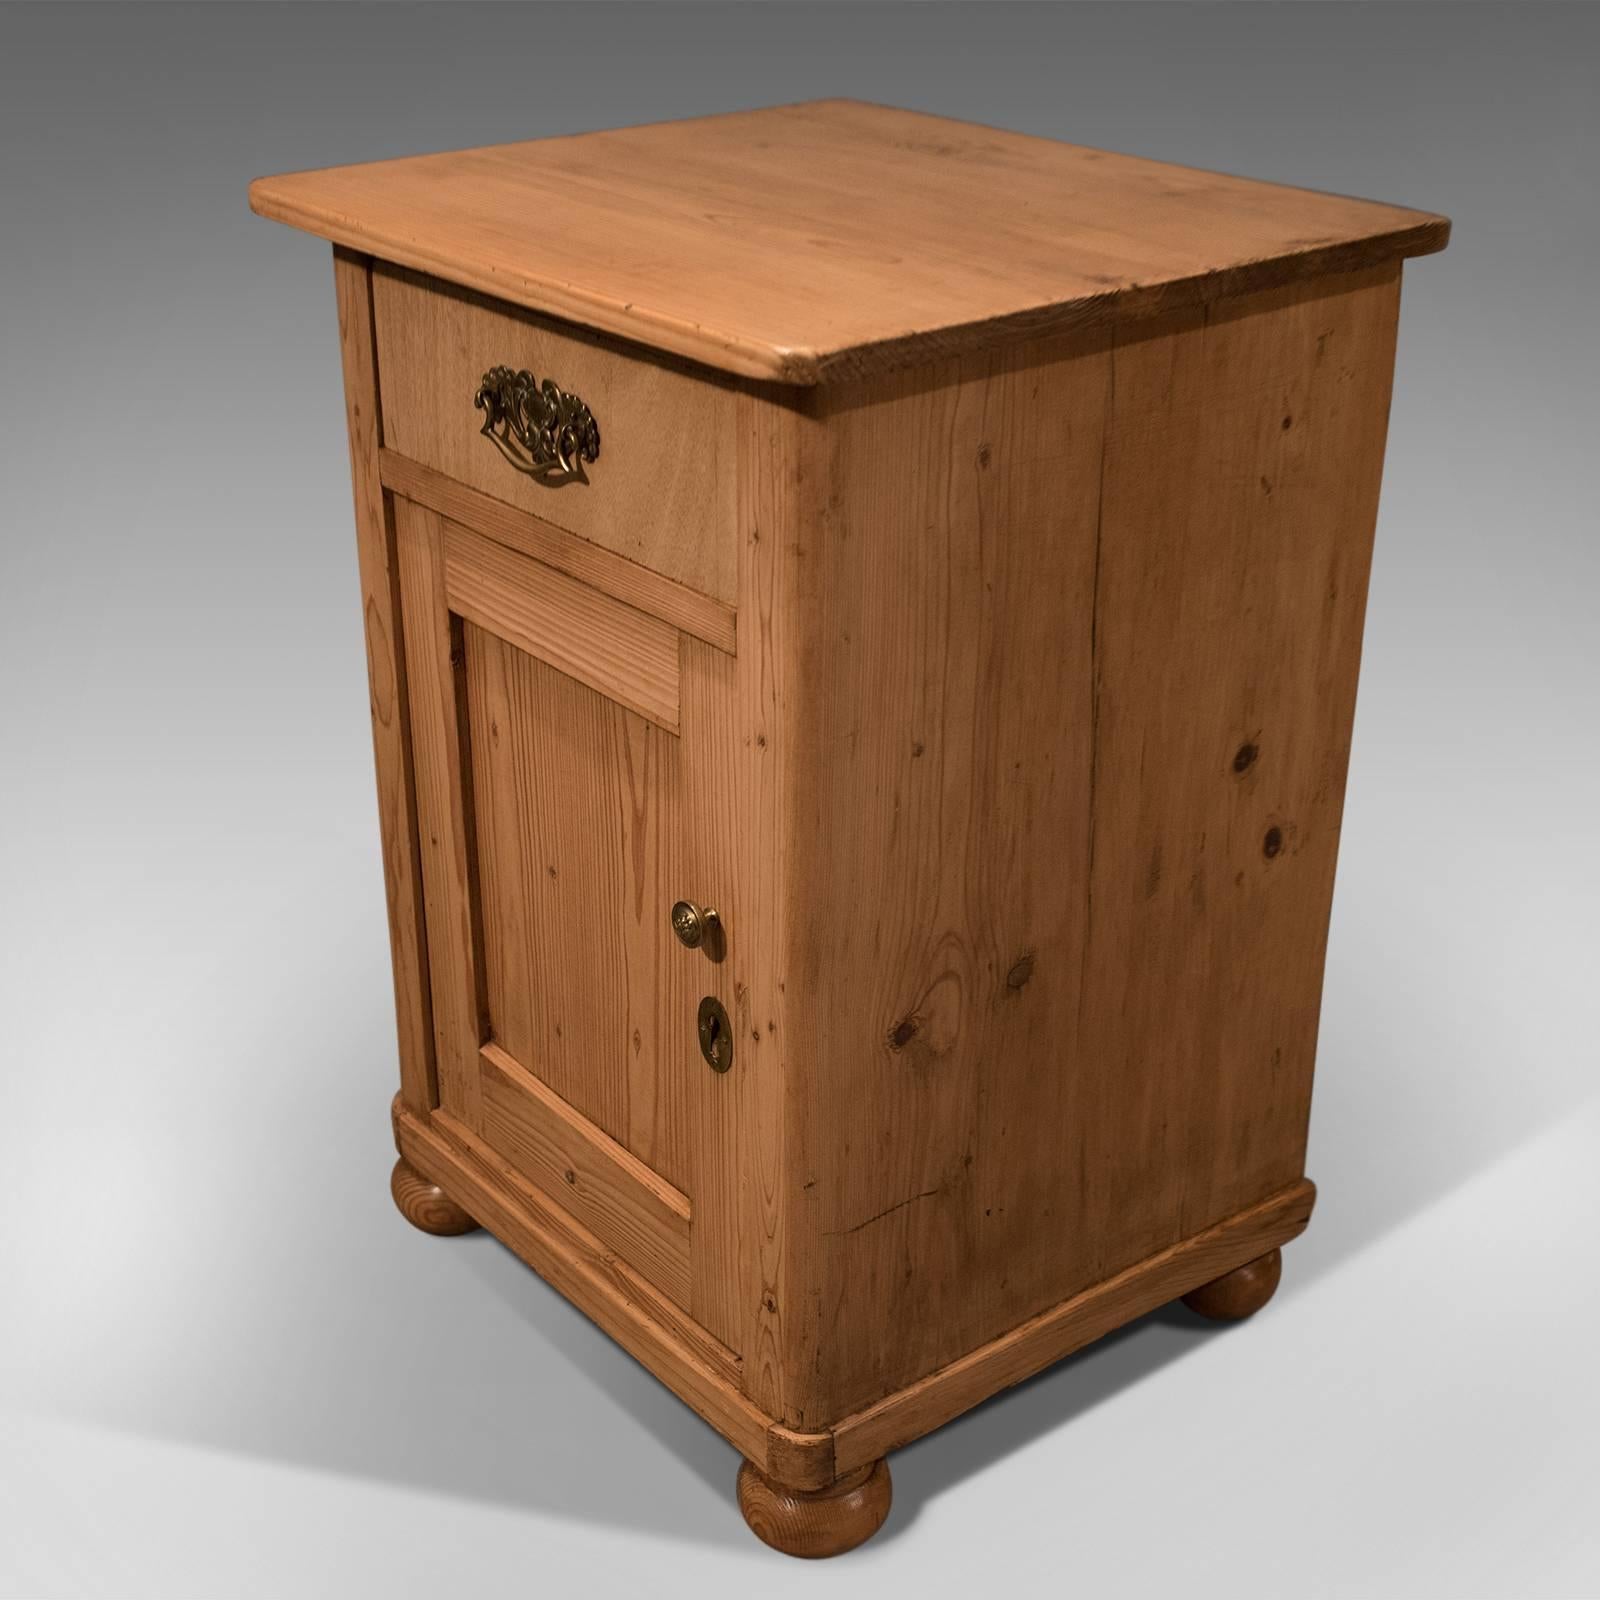 Early 20th Century Compact Cabinet or Bedside Cupboard, Victorian Pine, circa 1900